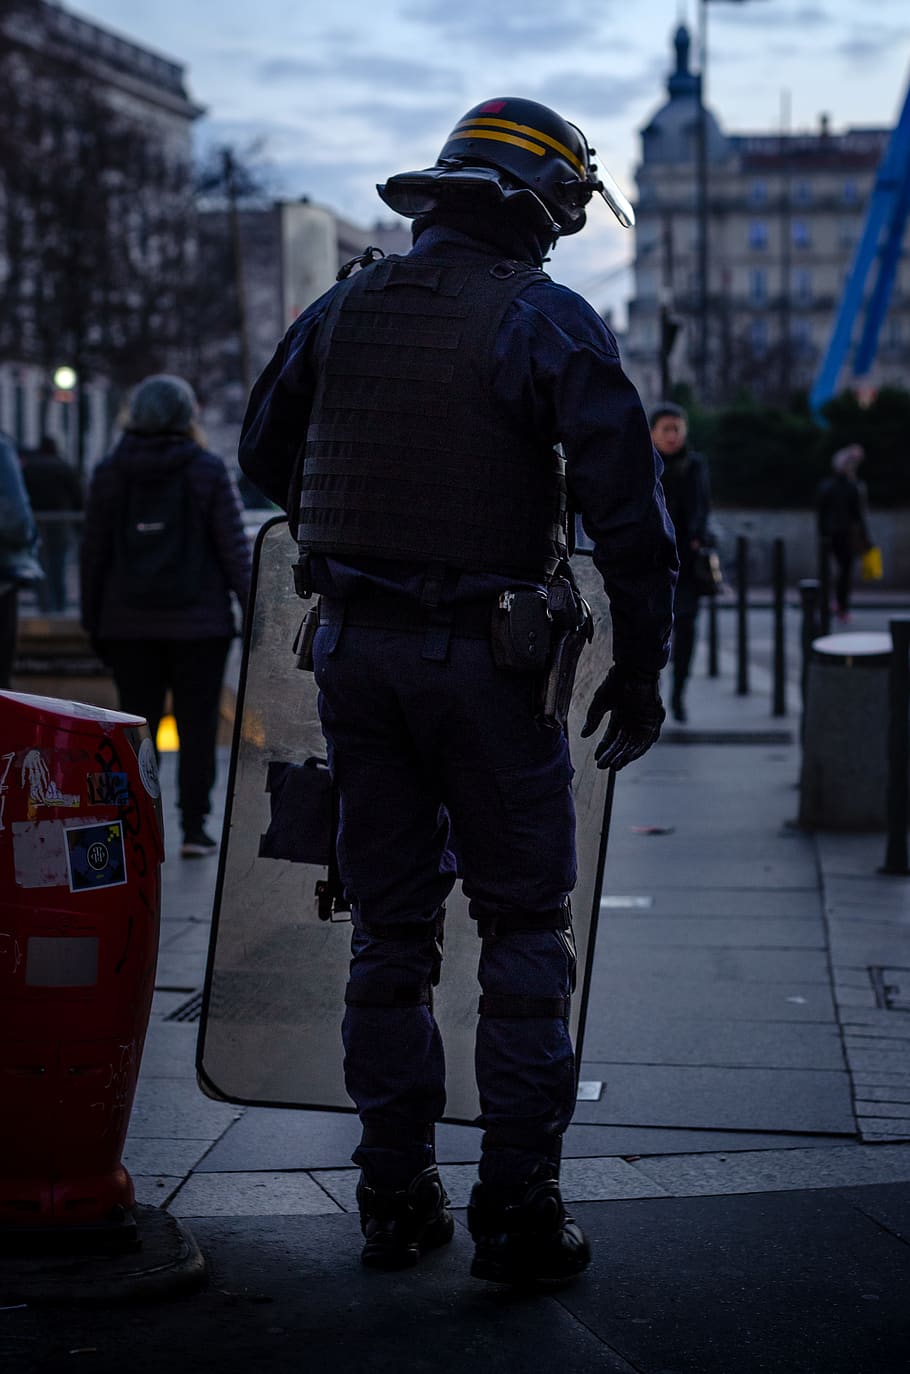 HD wallpaper: police officer standing and carrying riot shield